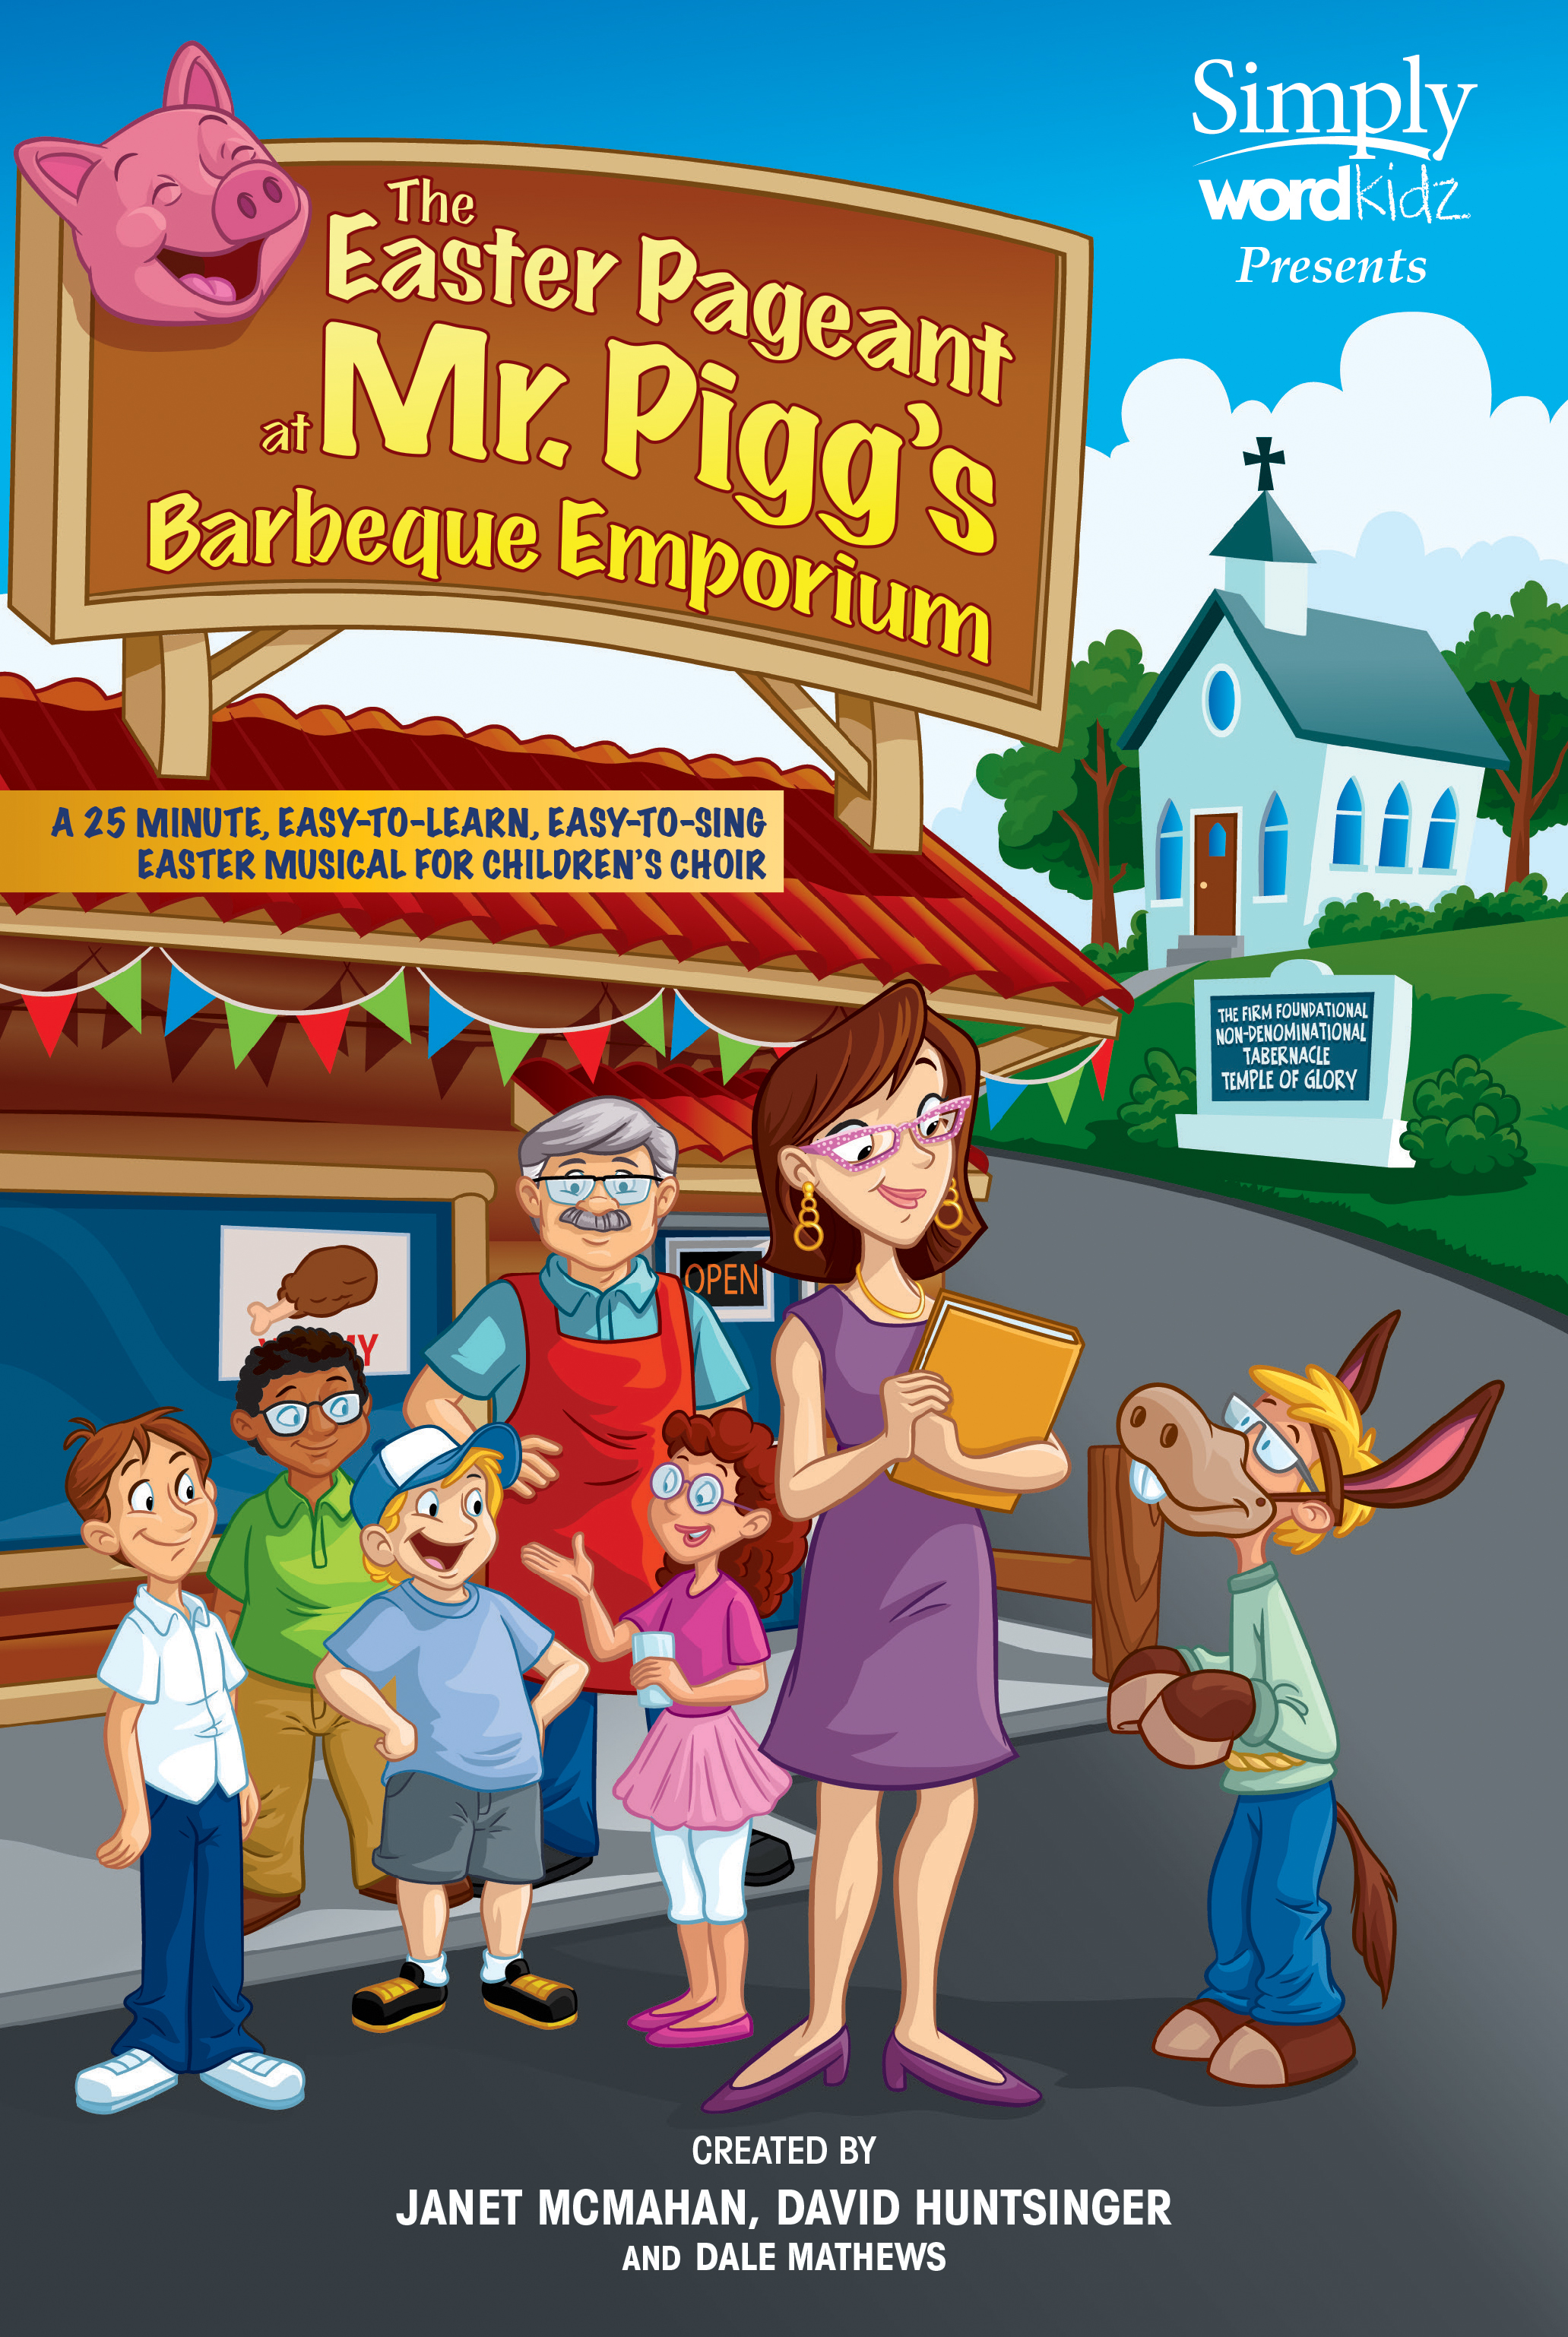 The Easter Pageant At Mr. Pigg's Barbeque Emporium